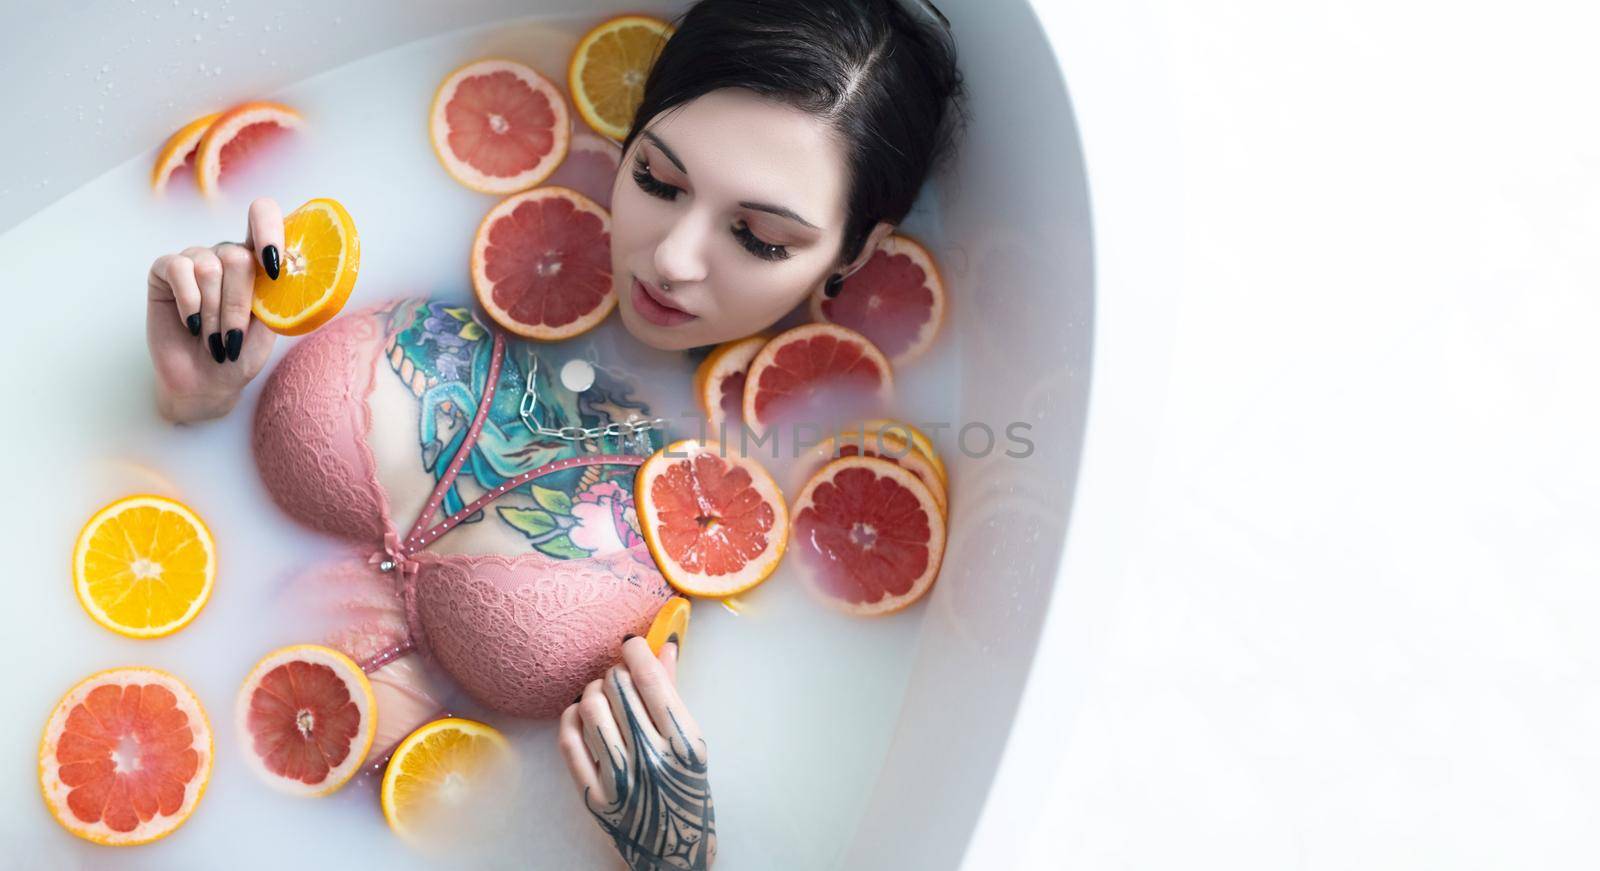 naked girl with tattoos takes a vitamin bath with sliced oranges and grapefruits